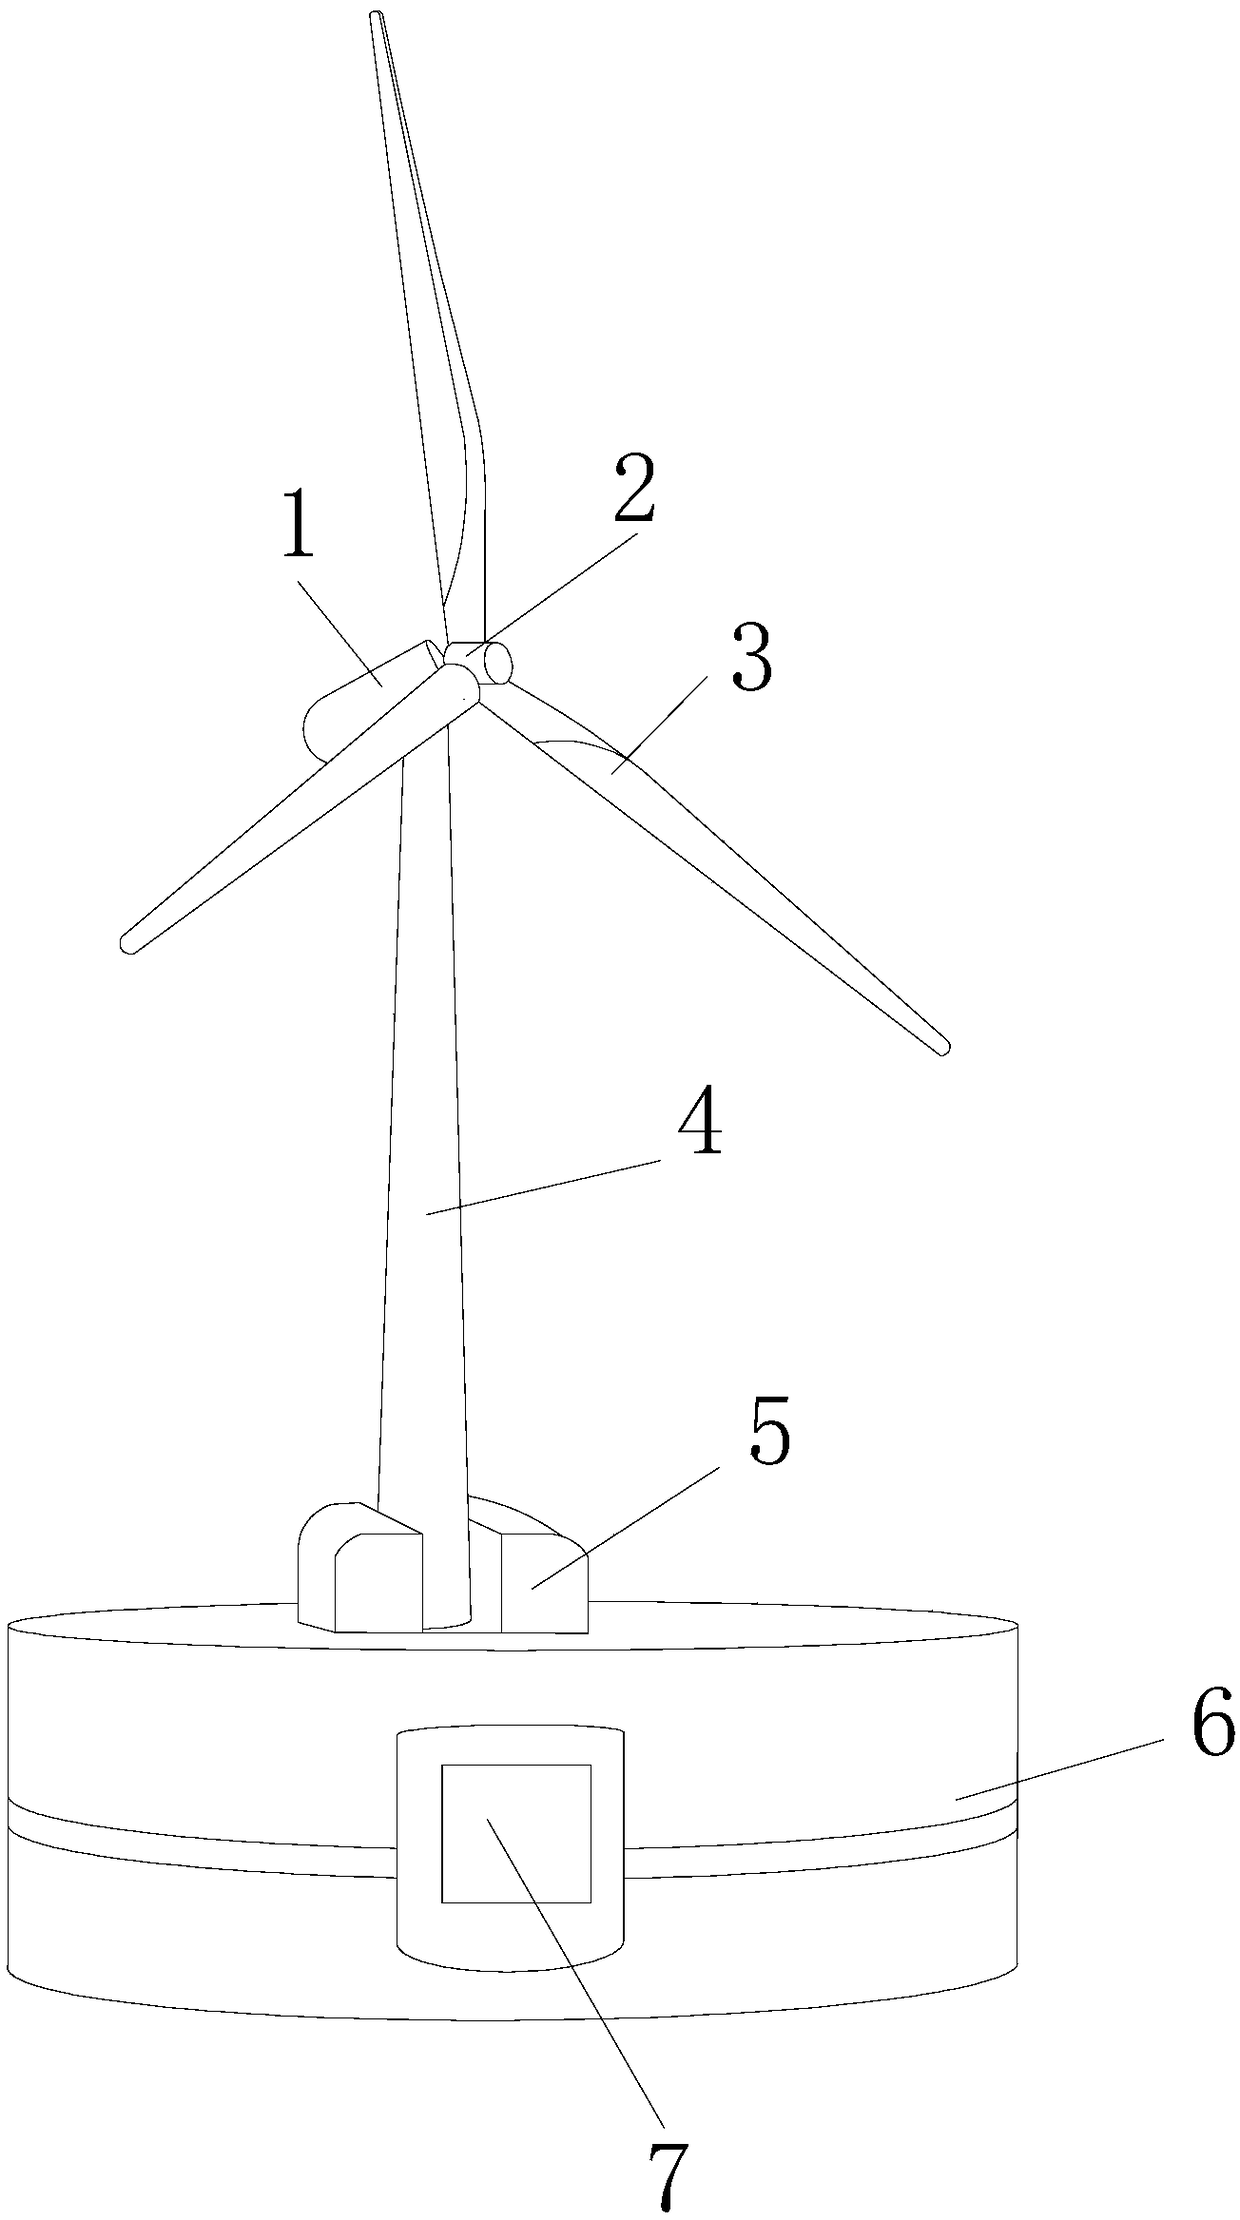 Floating body type offshore wind power generation equipment